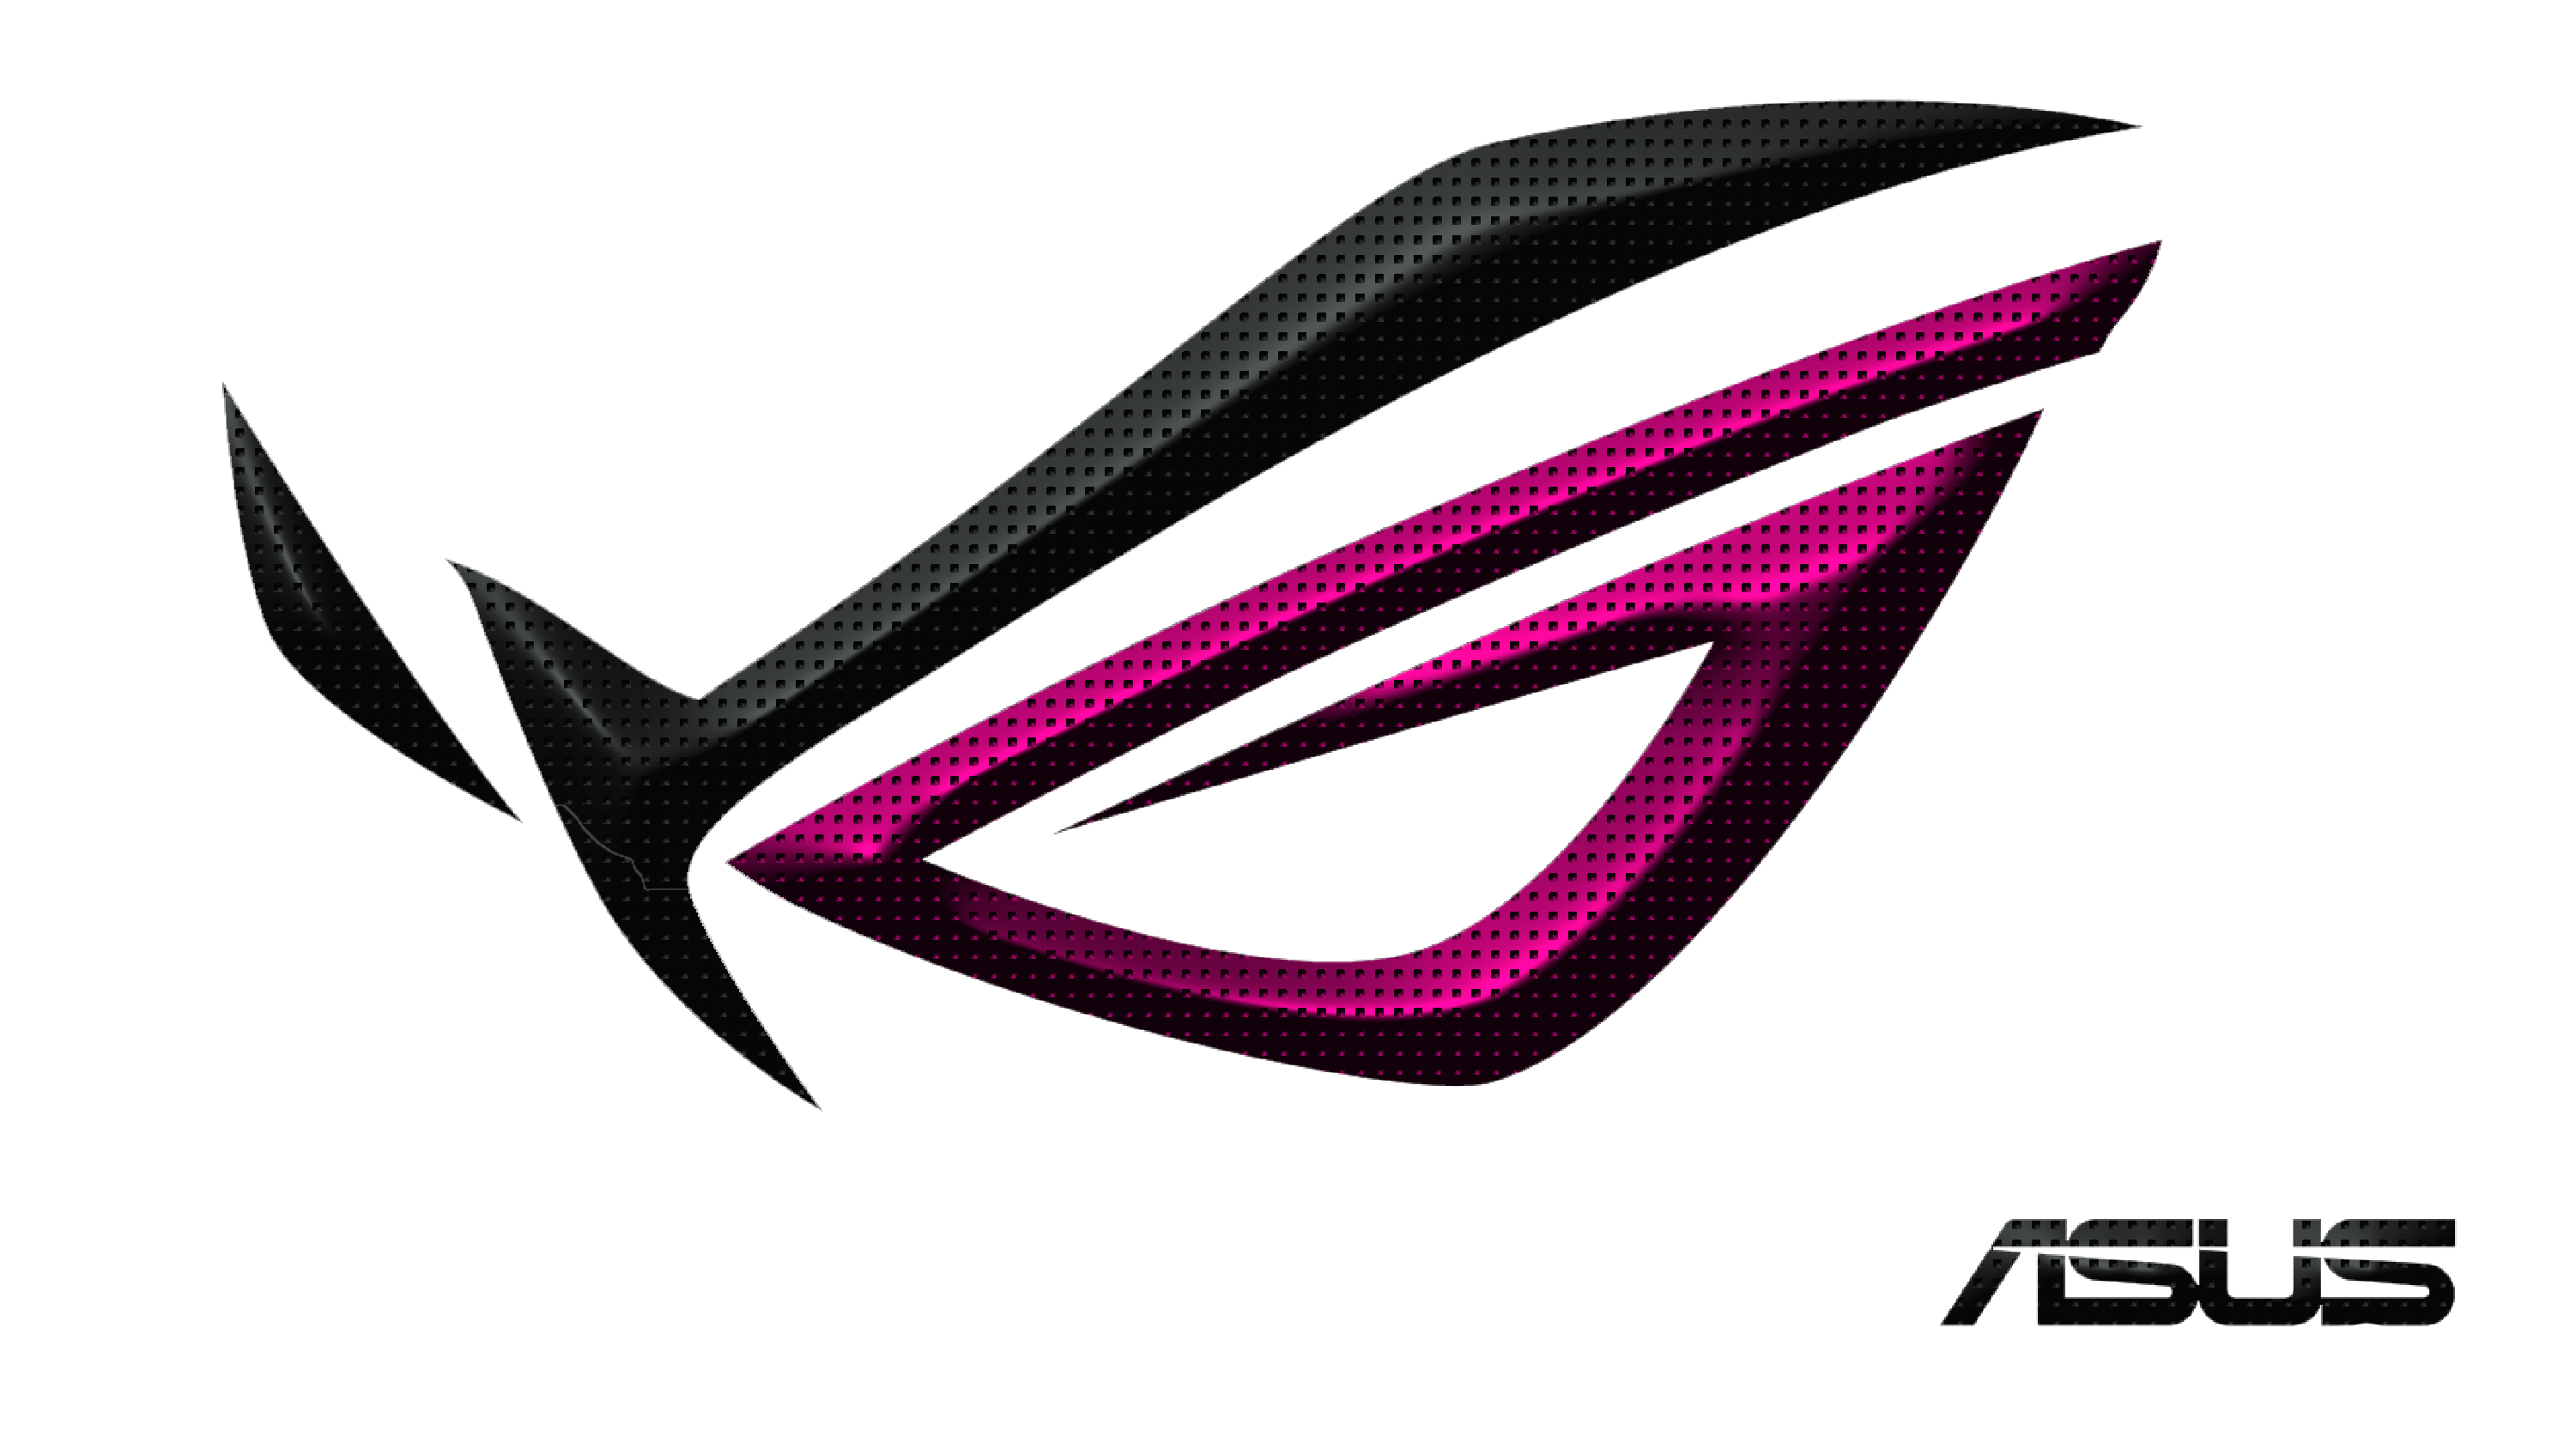 asus logo photo by llexandro #7168